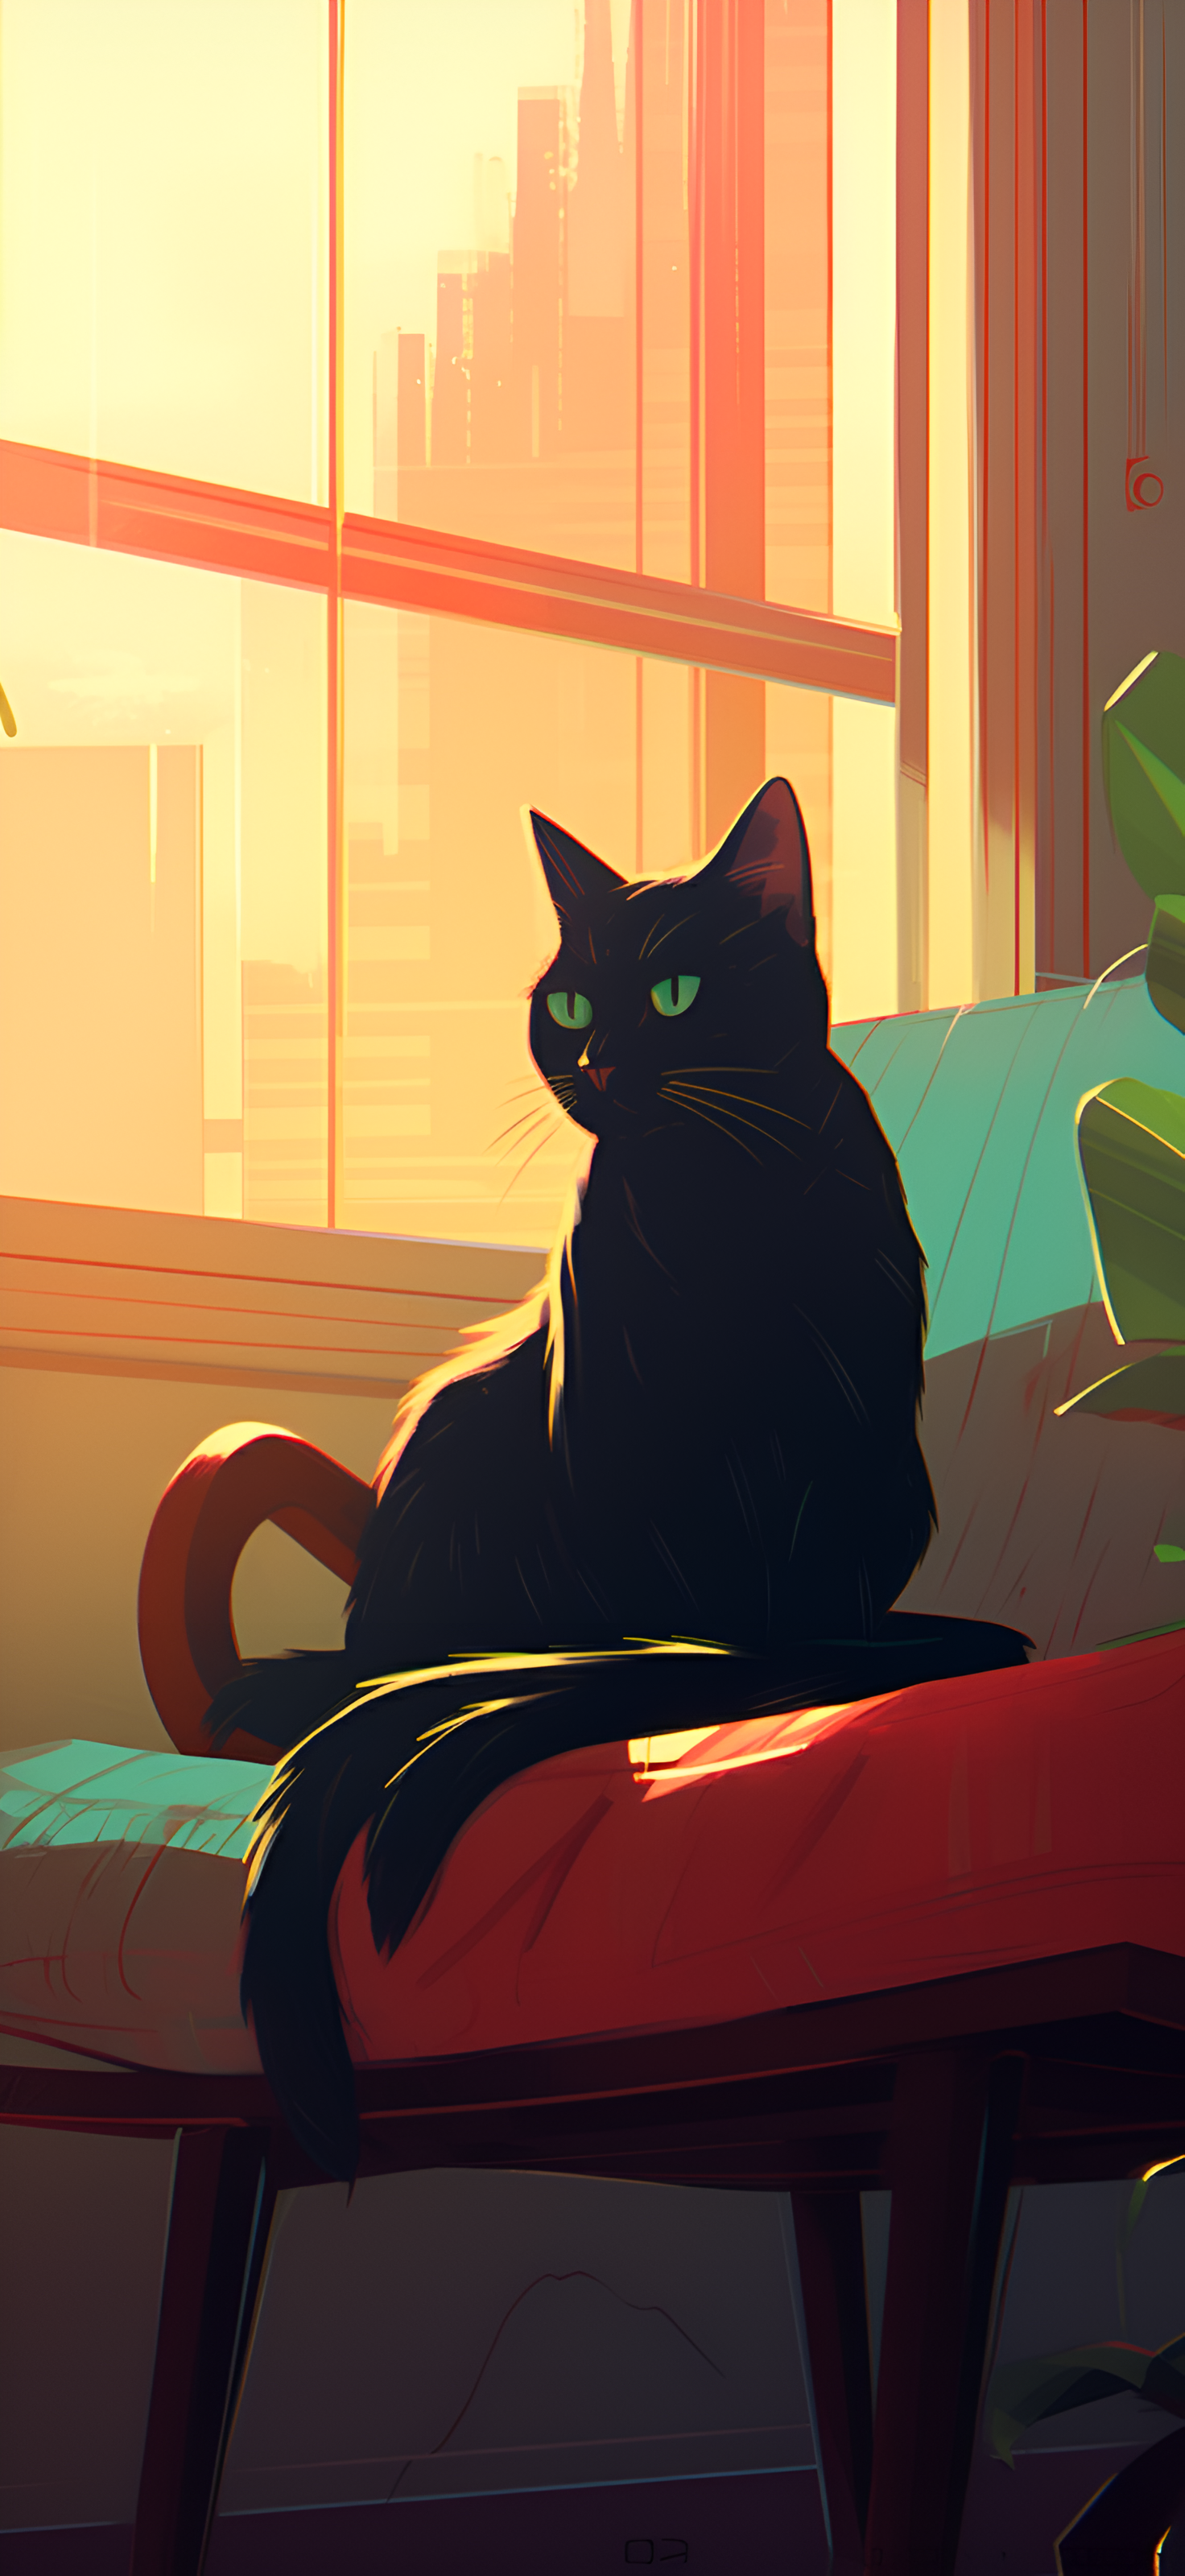 Black Cat With Green Eyes Sitting In Window City